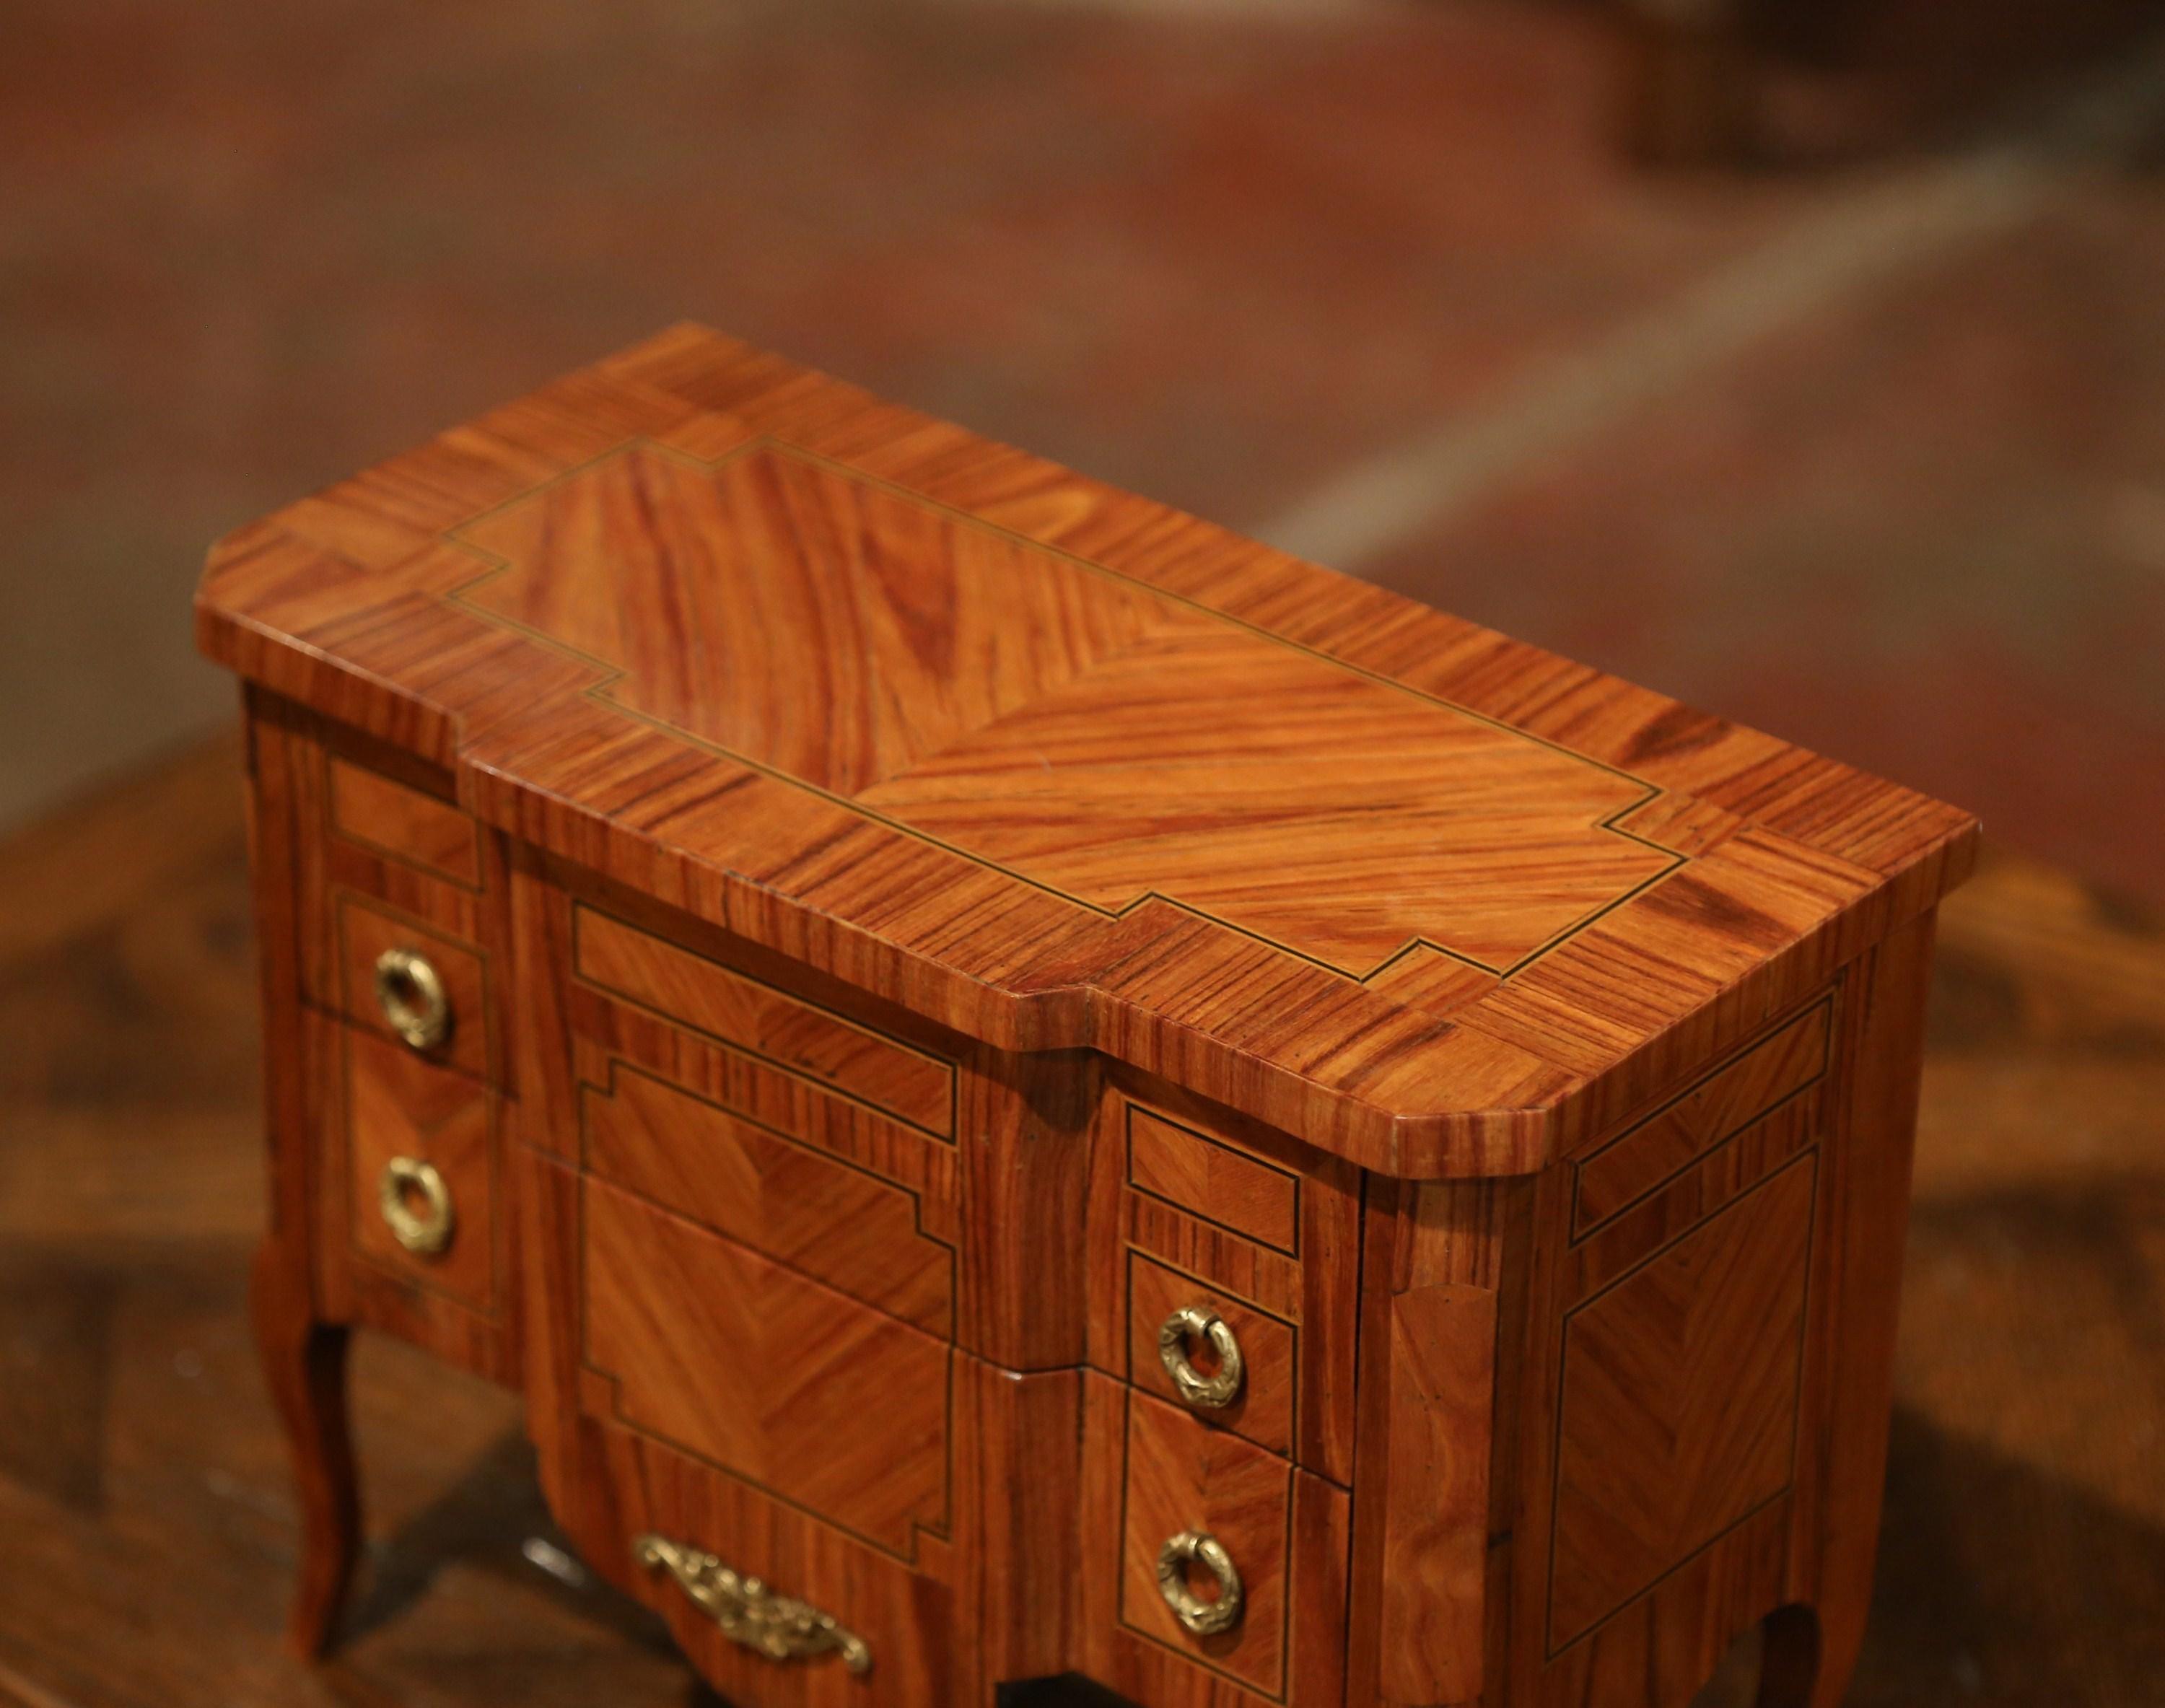 Hand-Crafted Mid-20th Century French Louis XV Walnut Veneer Marquetry Inlay Miniature Commode